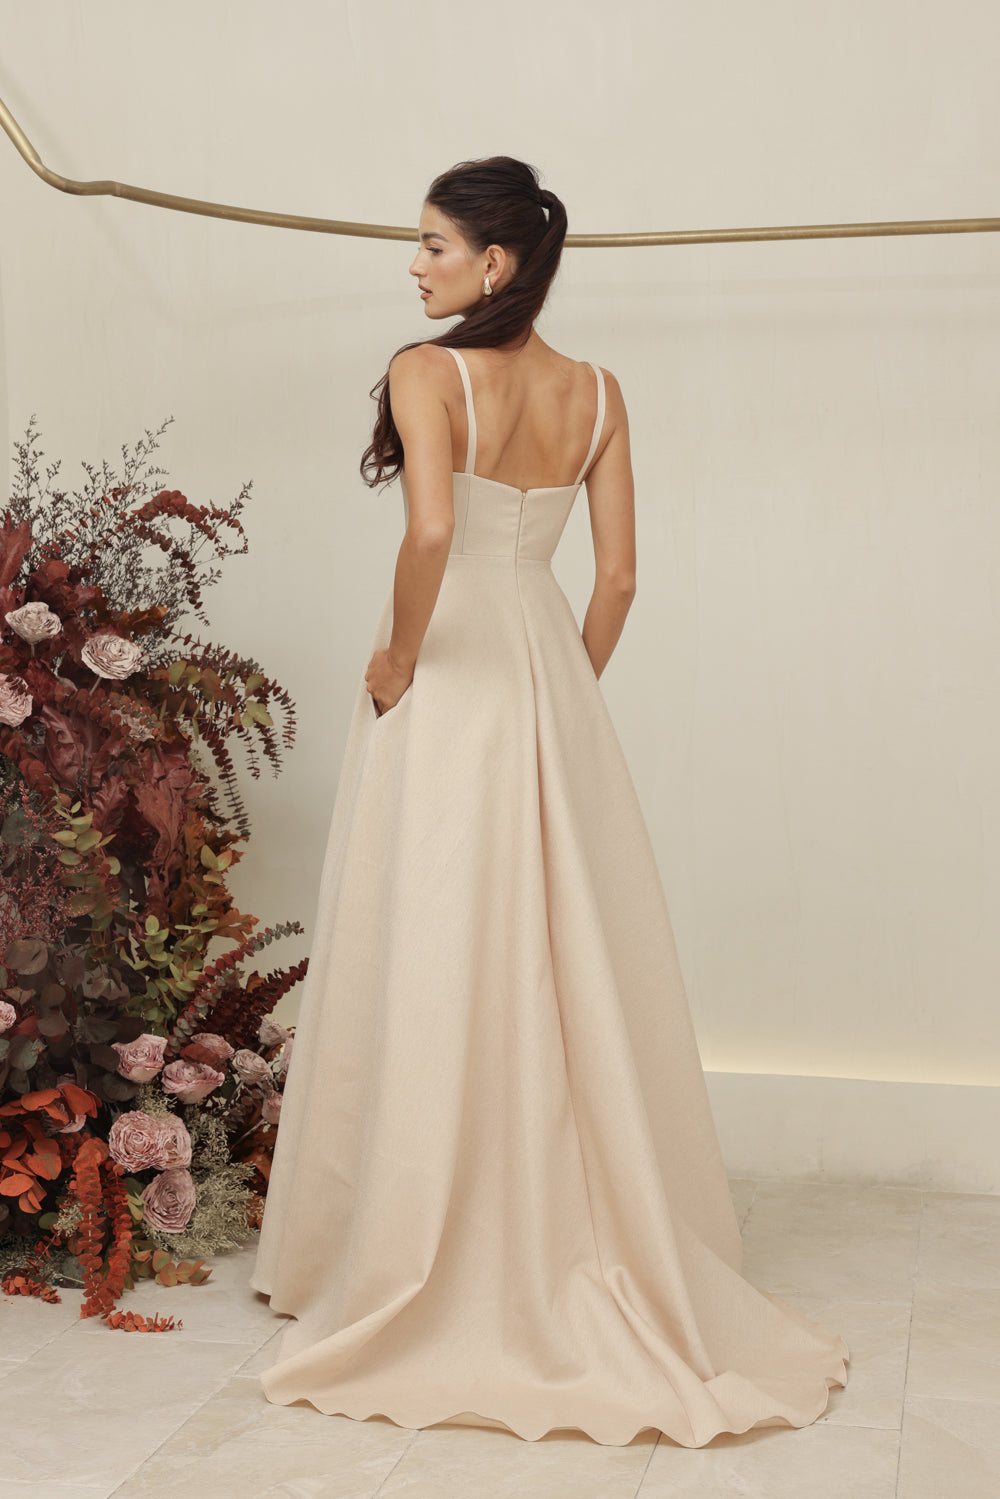 MARCELINE DRESS Straight Neckline Strappy Maxi Gown with Floral Details and Pockets (Nude Gazaar)